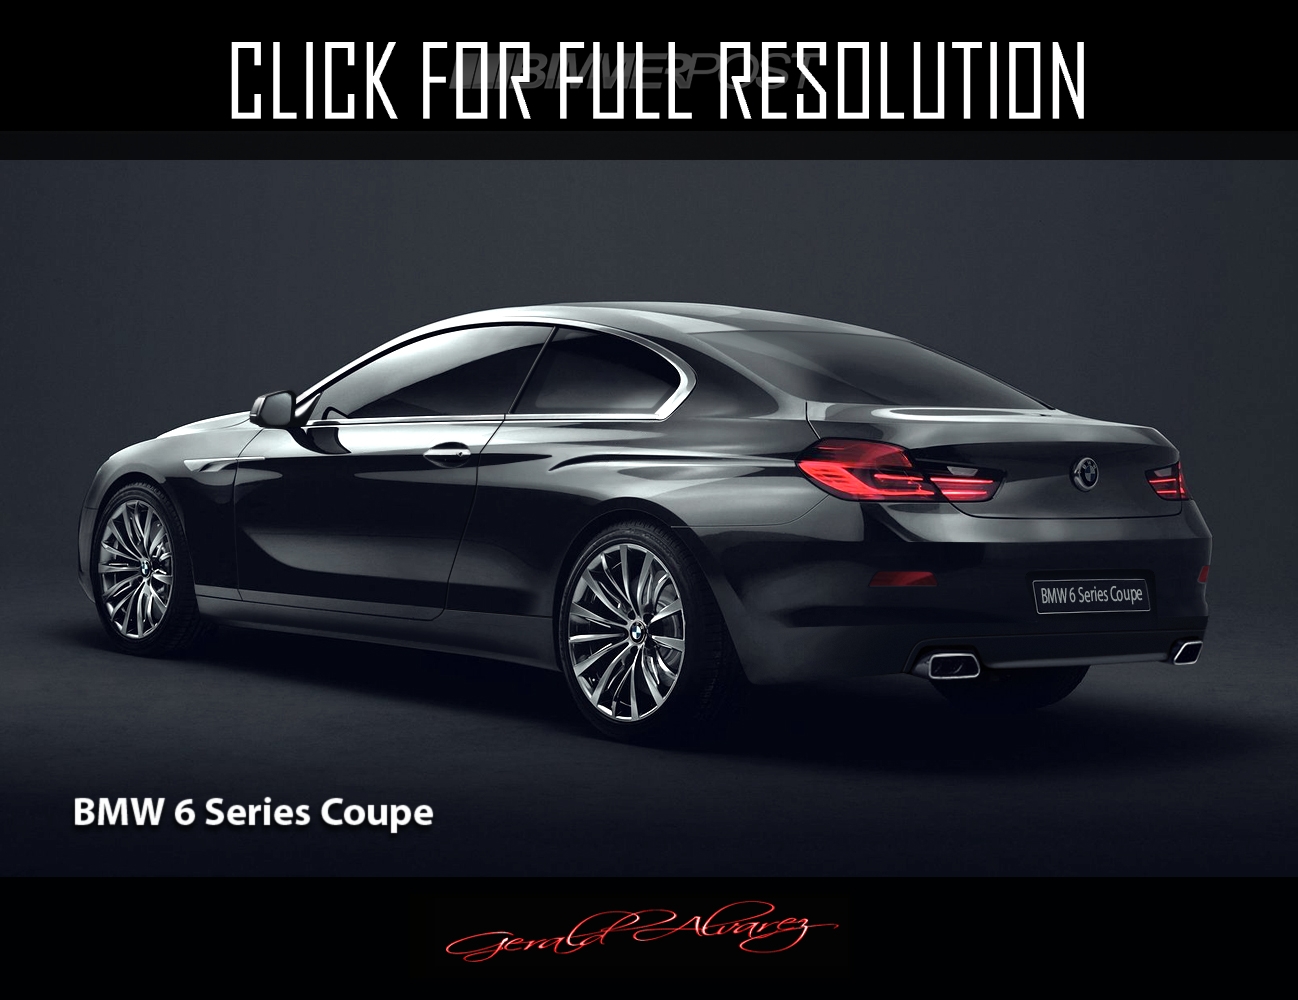 Bmw 5 Series Coupe